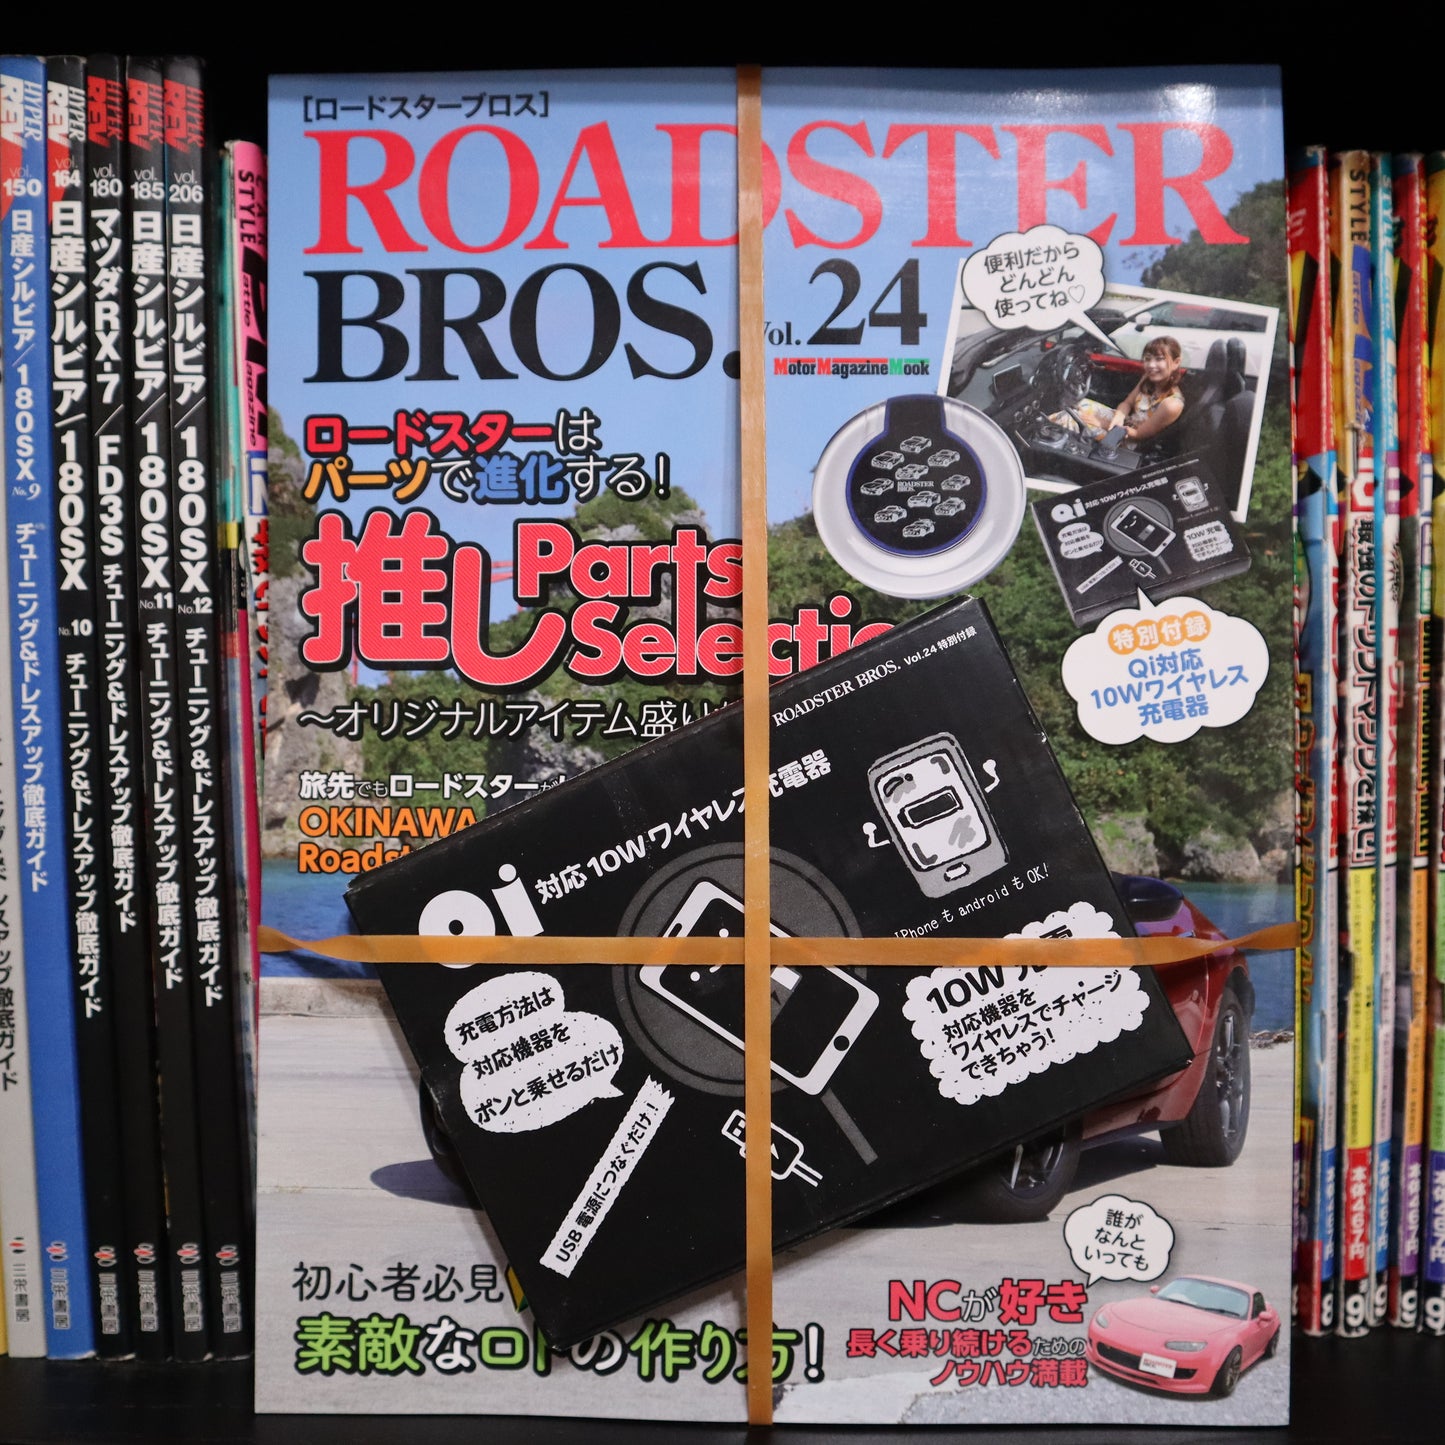 ROADSTER BROS. Vol.24 (w/ wireless charger)